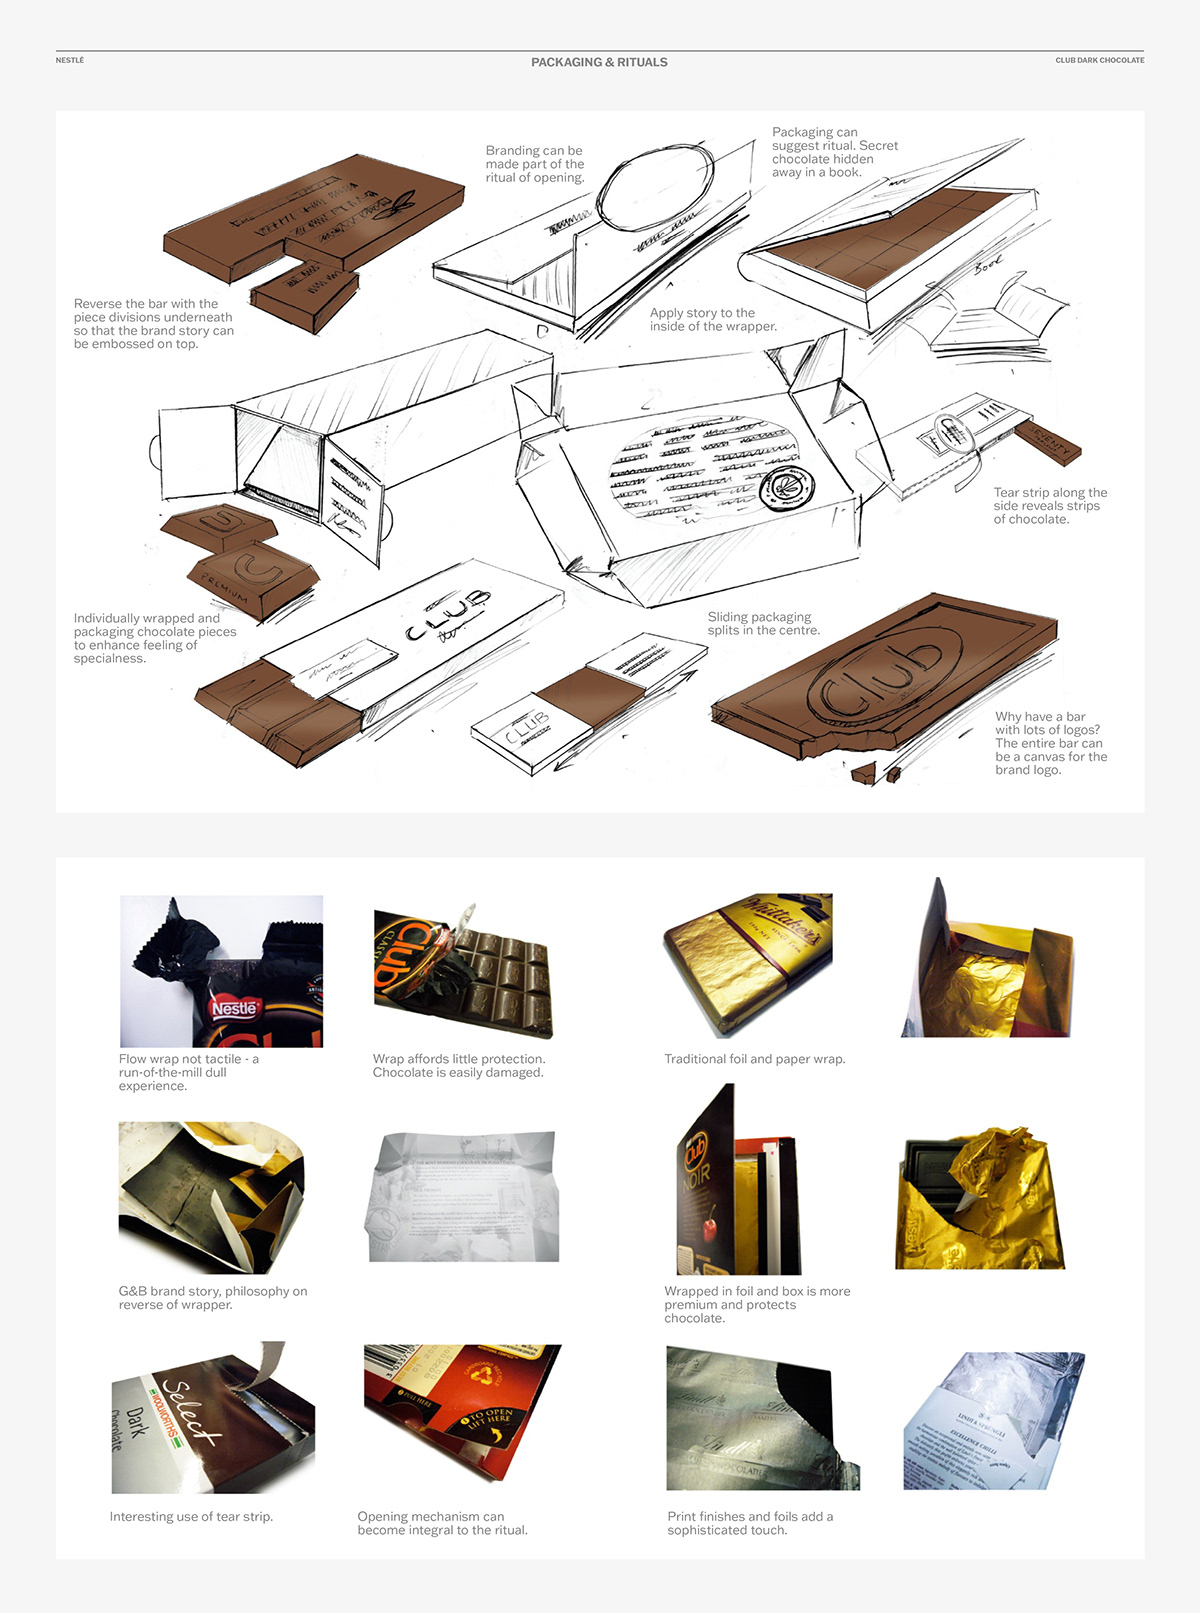 2009 Nestle Club Dark Chocolate packaging structure design concepts and rituals exploration. 